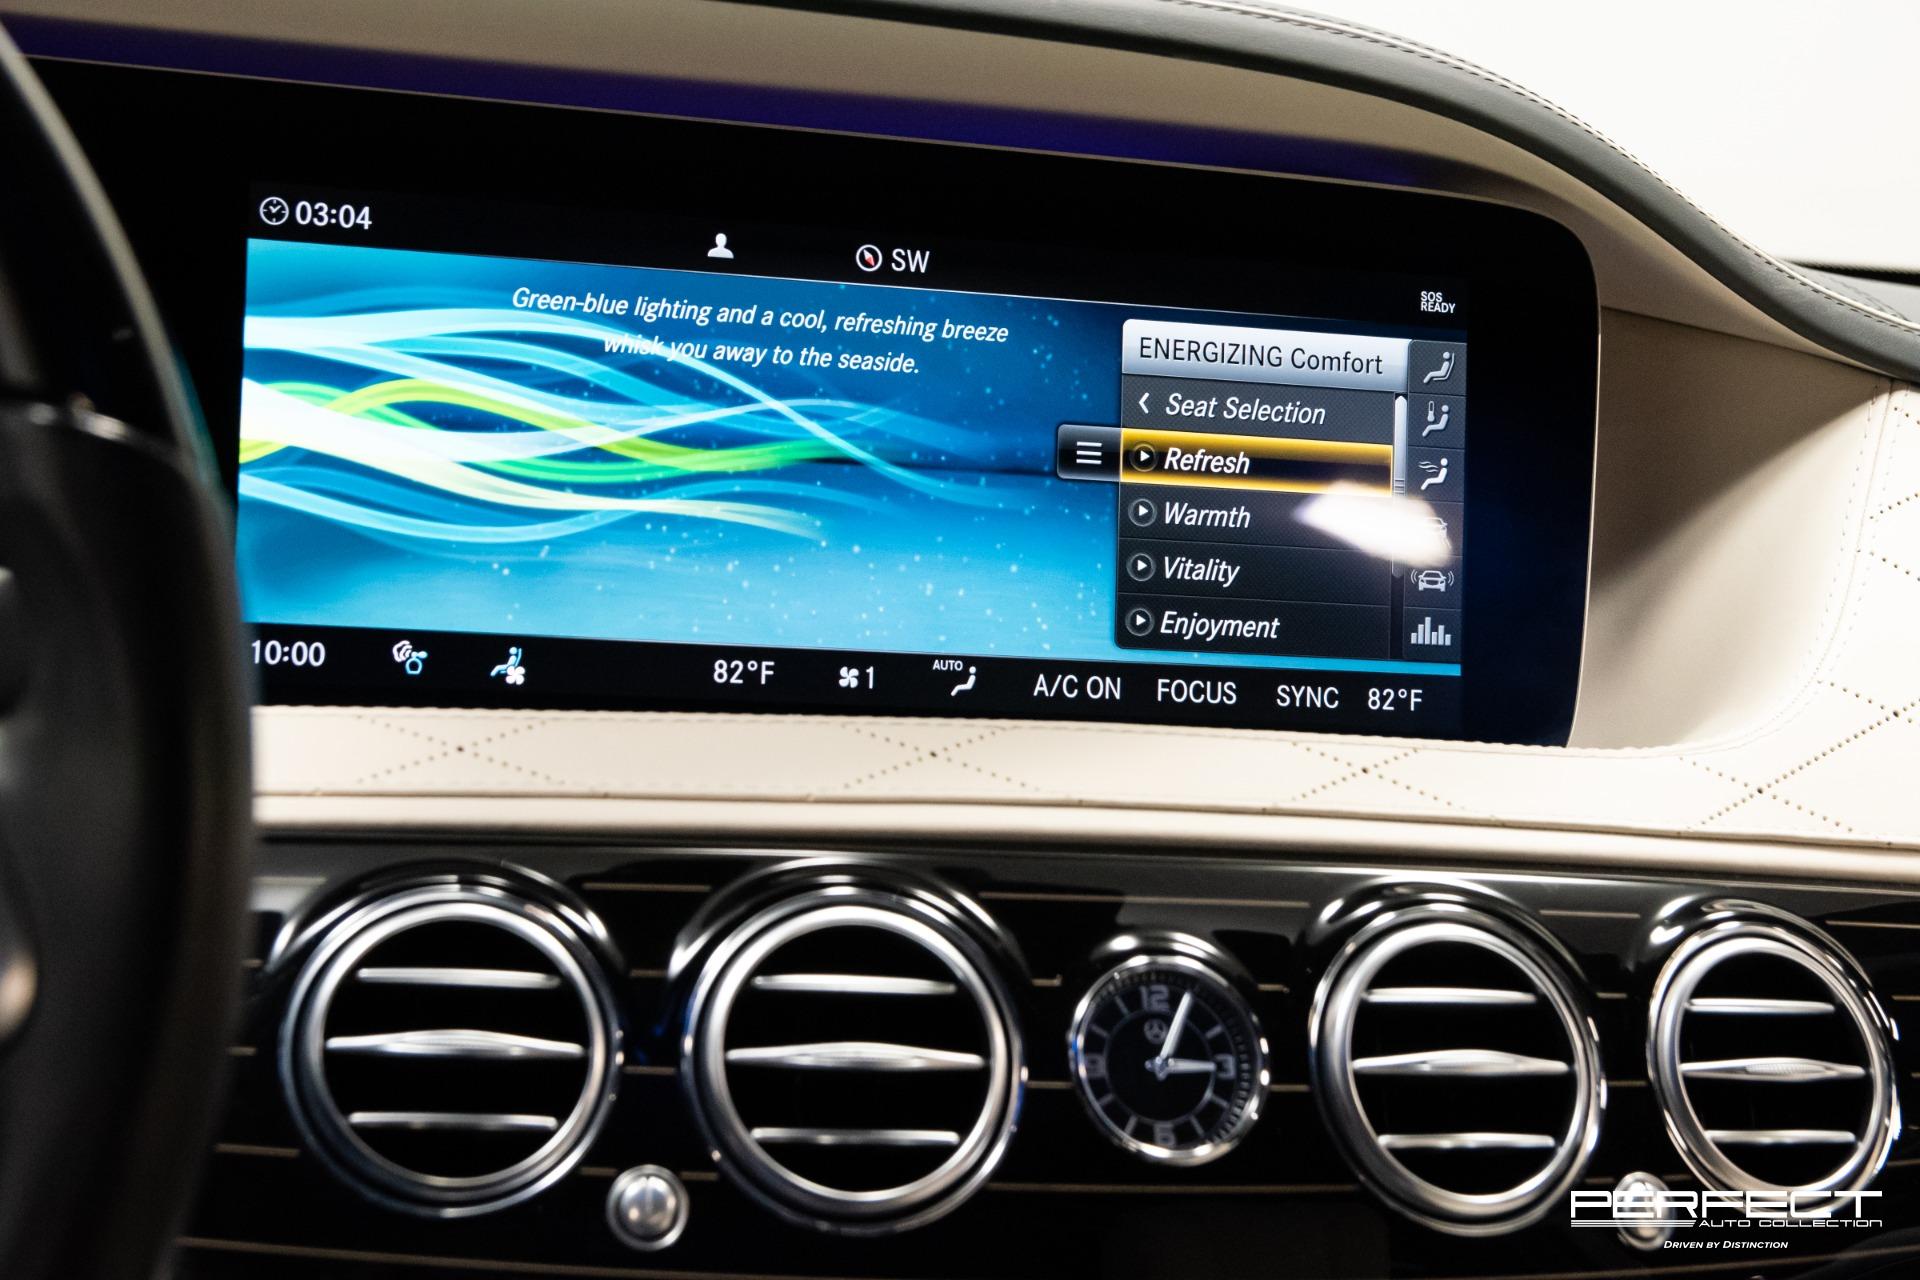 What is Mercedes-Benz Energizing Comfort Control technology